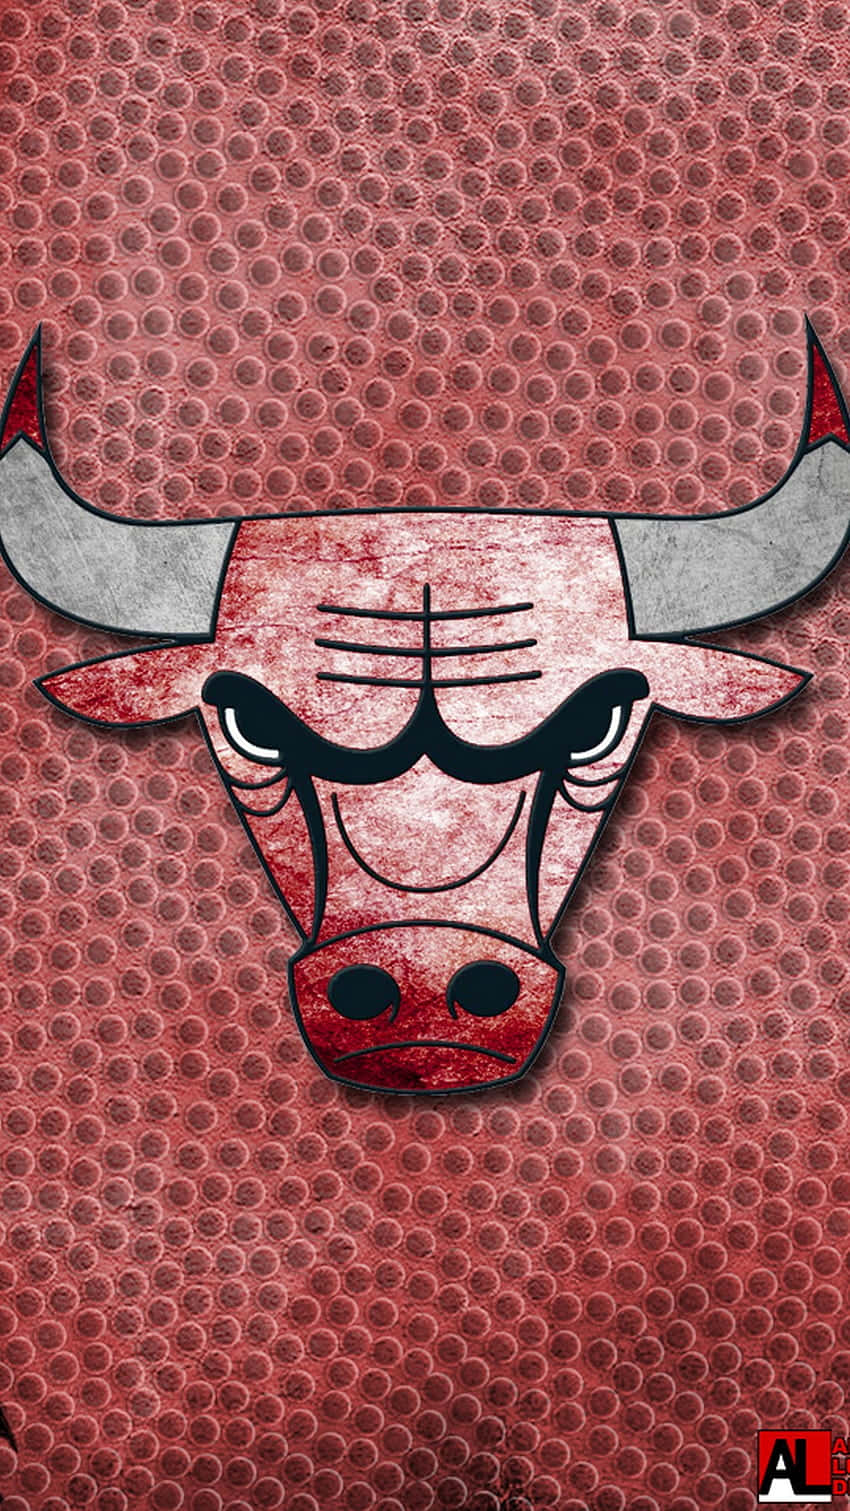 Get Ready To Cheer On Your Favorite Team – Chicago Bulls! Wallpaper